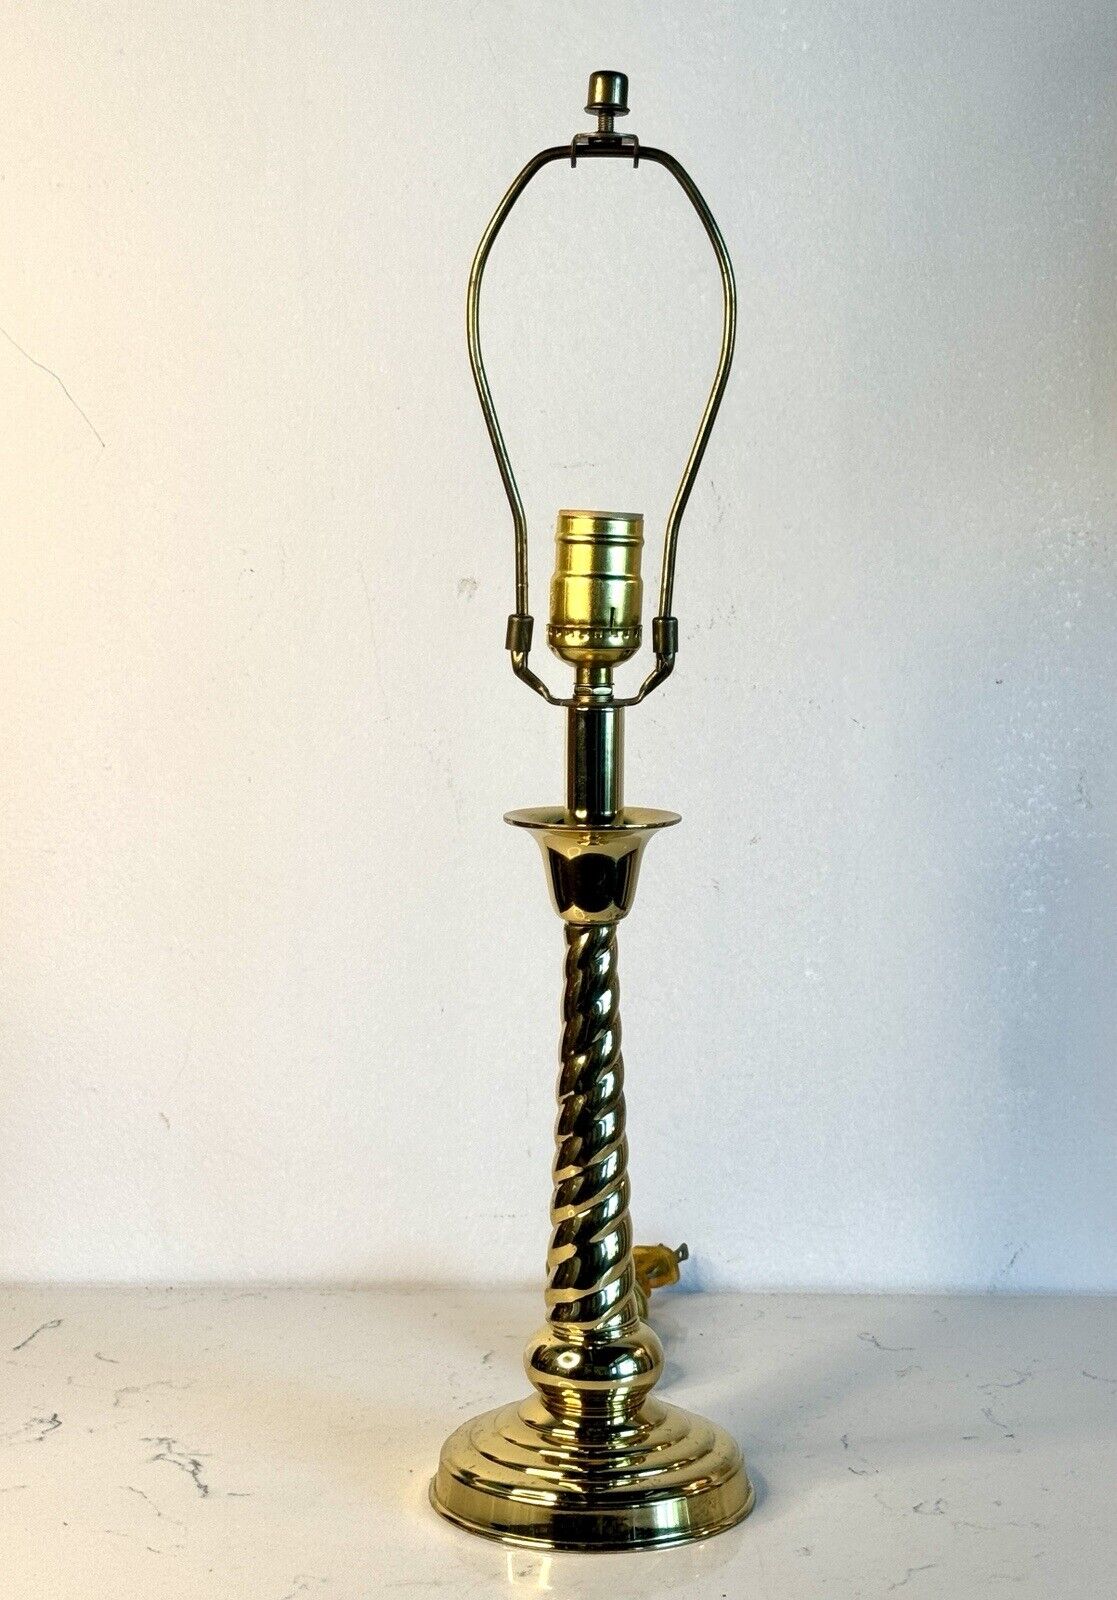 Berman Twisted Solid Brass Table Lamp 1989